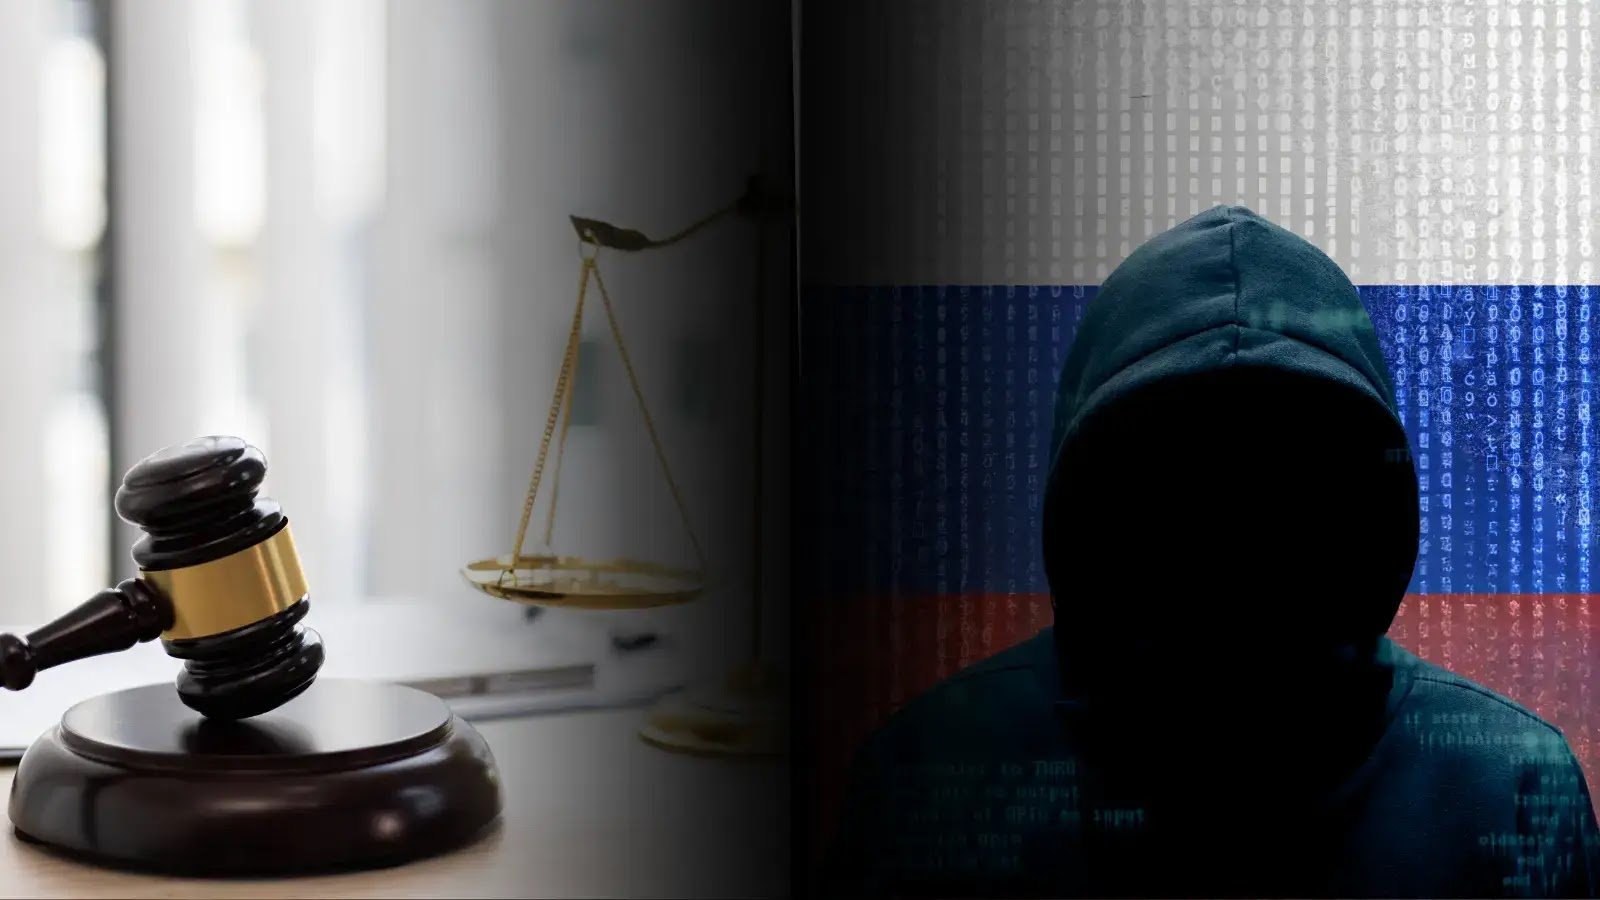 Russian Hackers Charged for Selling Unauthorized access to computer networks